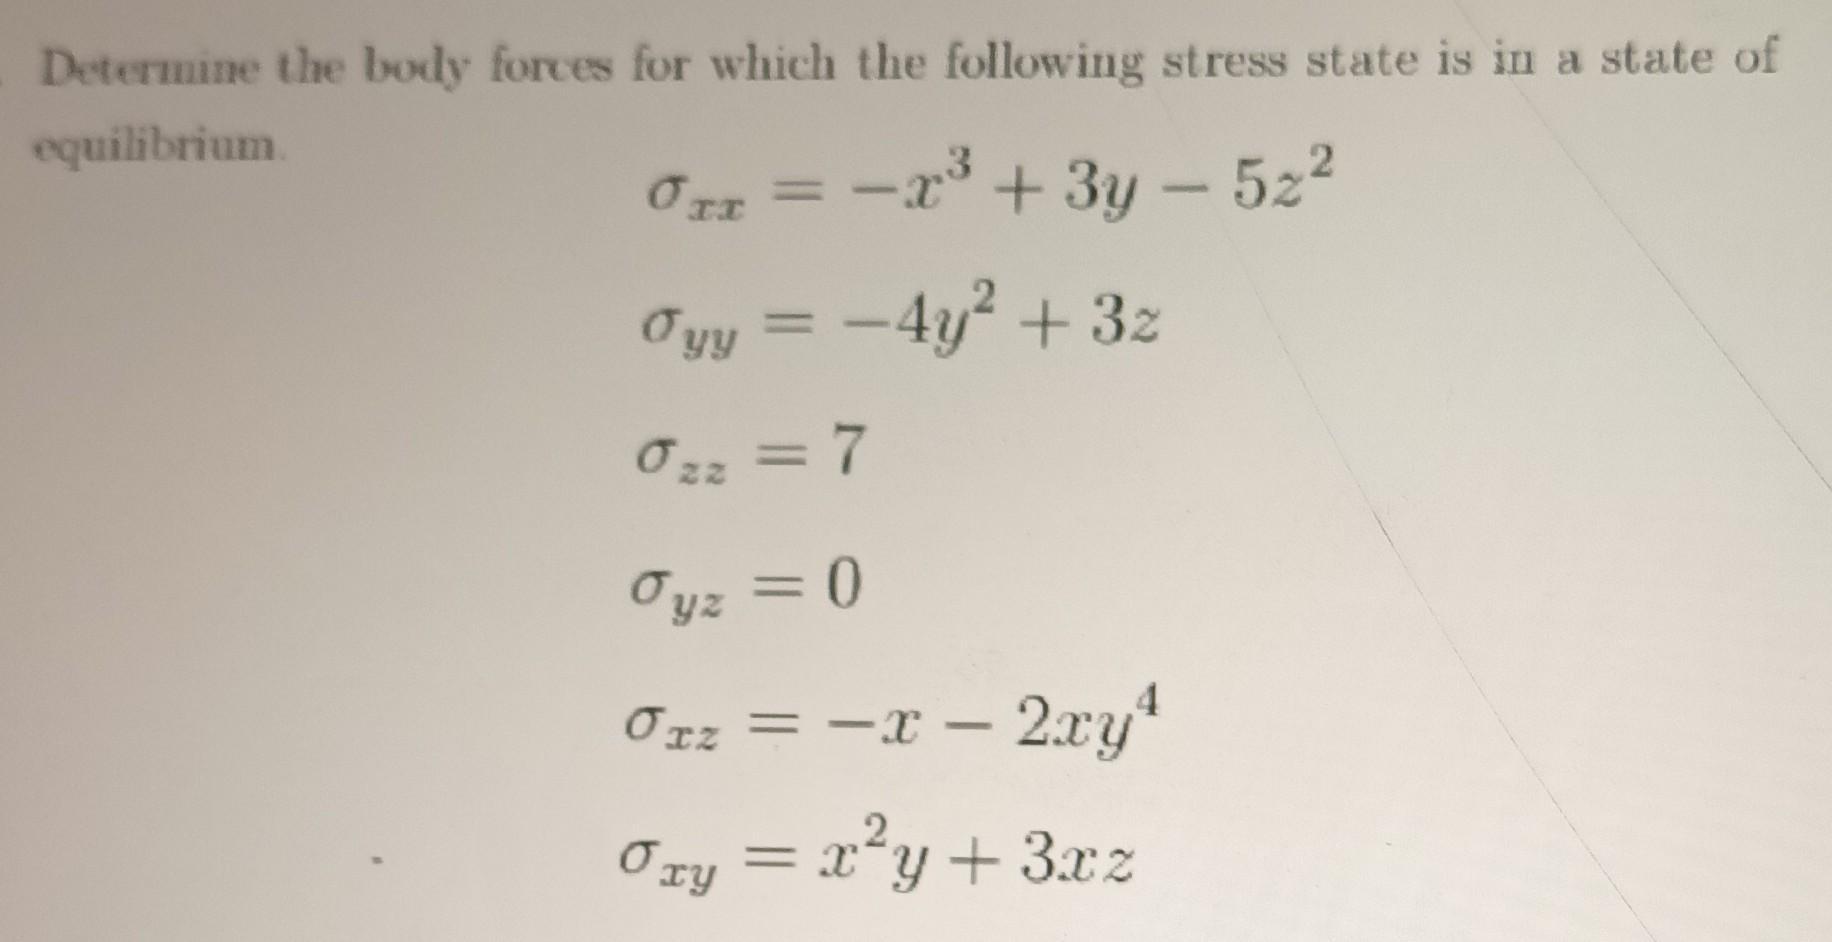 Determine the body forces for which the following stress state is in a state of equilibrium. = -x + 3y - 52